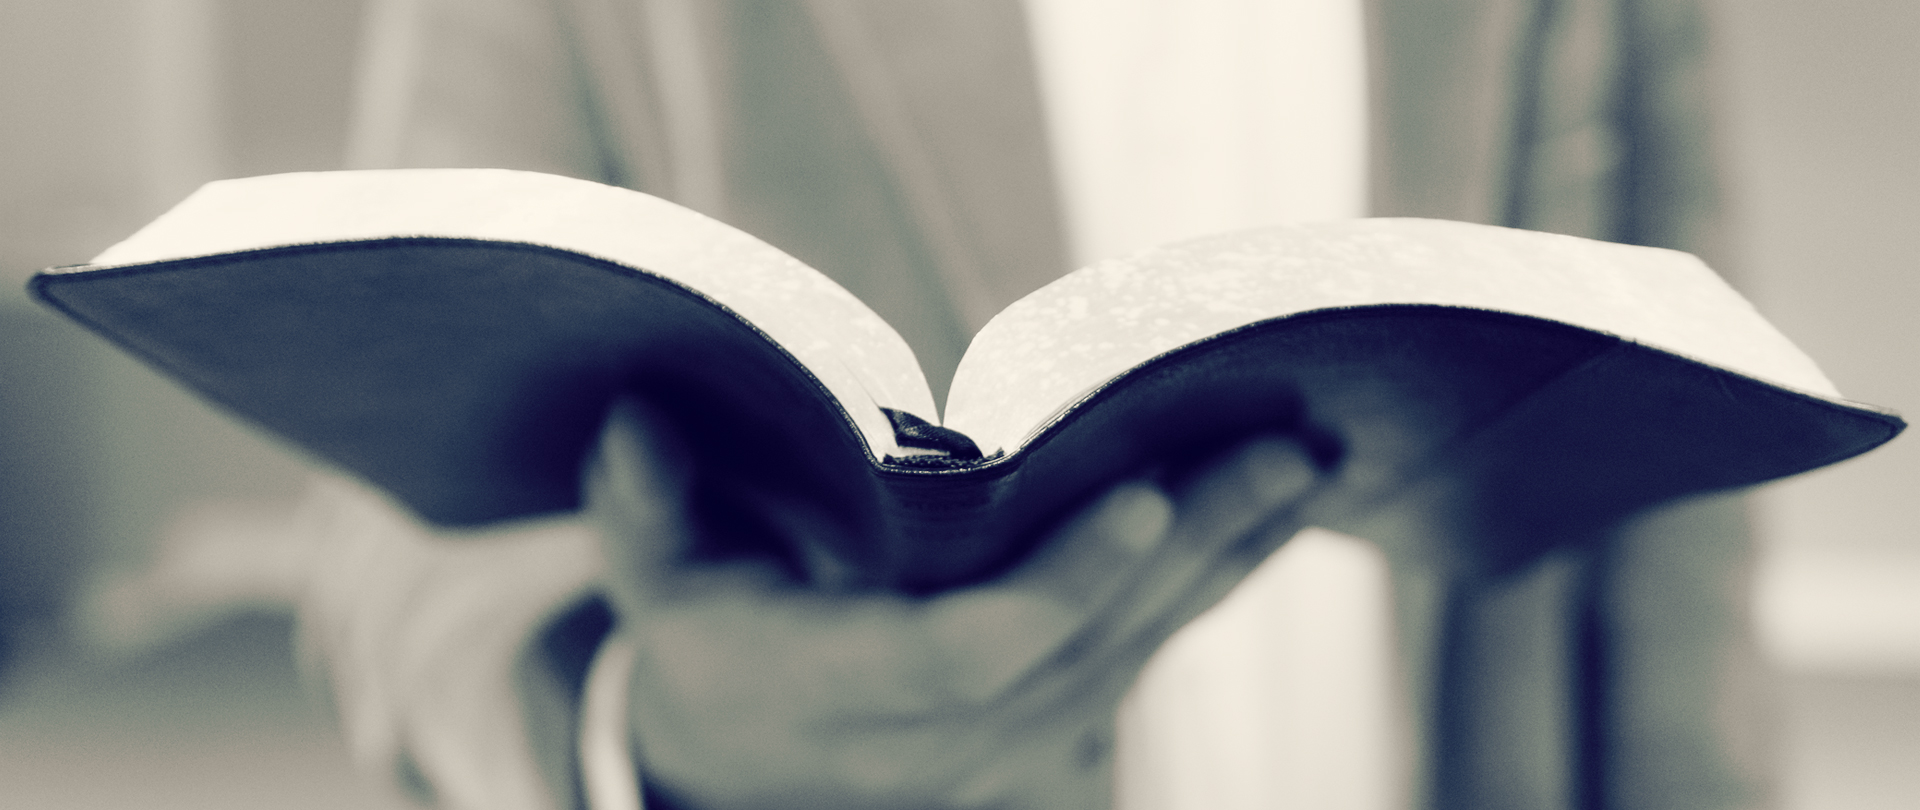 Beliefs
At Calvary, our focus is on God's Word
Read our Articles of Faith
